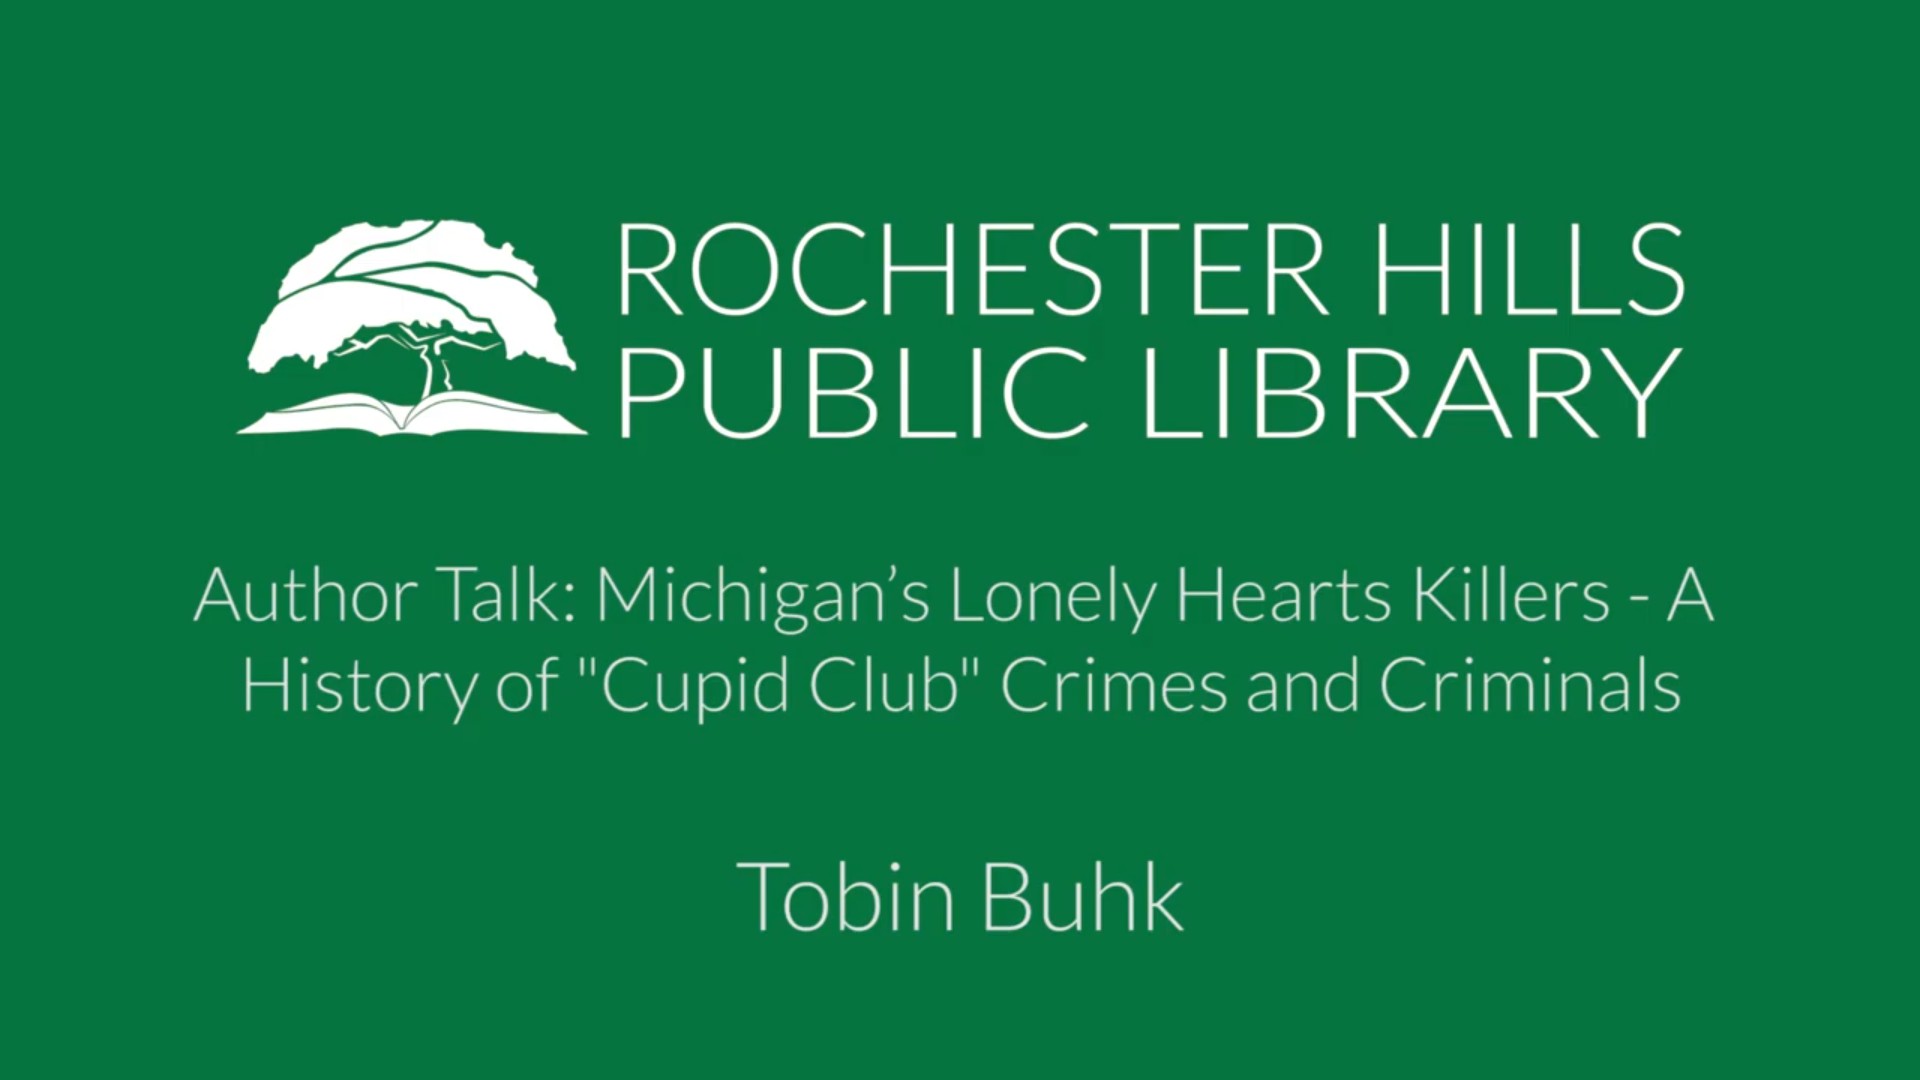 Author Talk: Michigan’s Lonely Hearts Killers